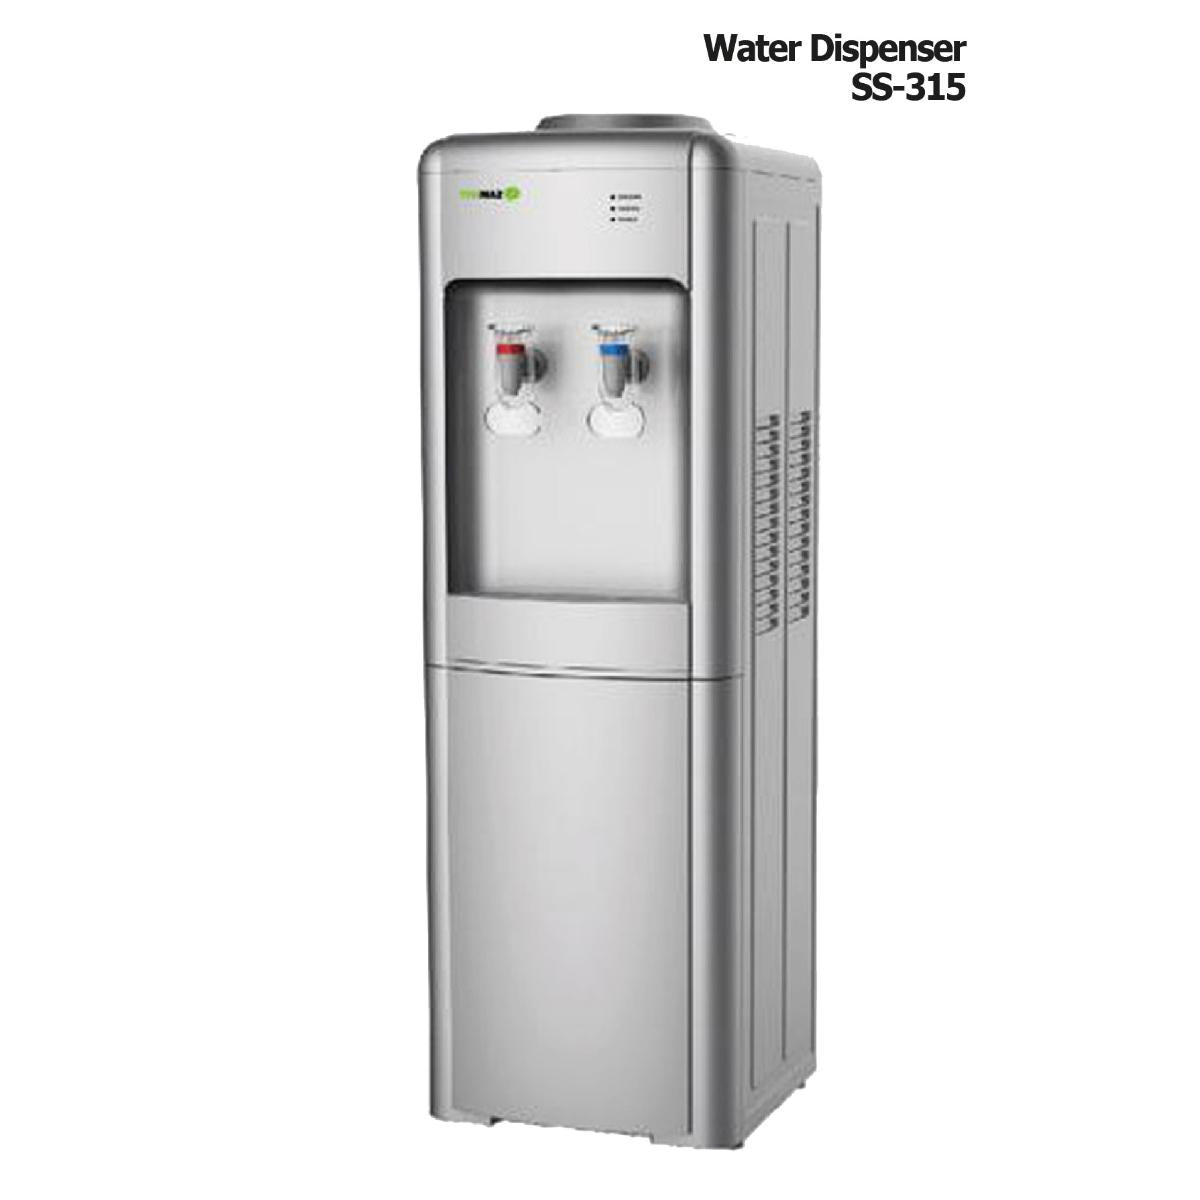 NAS-SS01/Tekmaz  Stand water dispenser ,Stainless steel ,Size : 35.5X36.5X10.98 cm,Hot & Cold STAND / 2